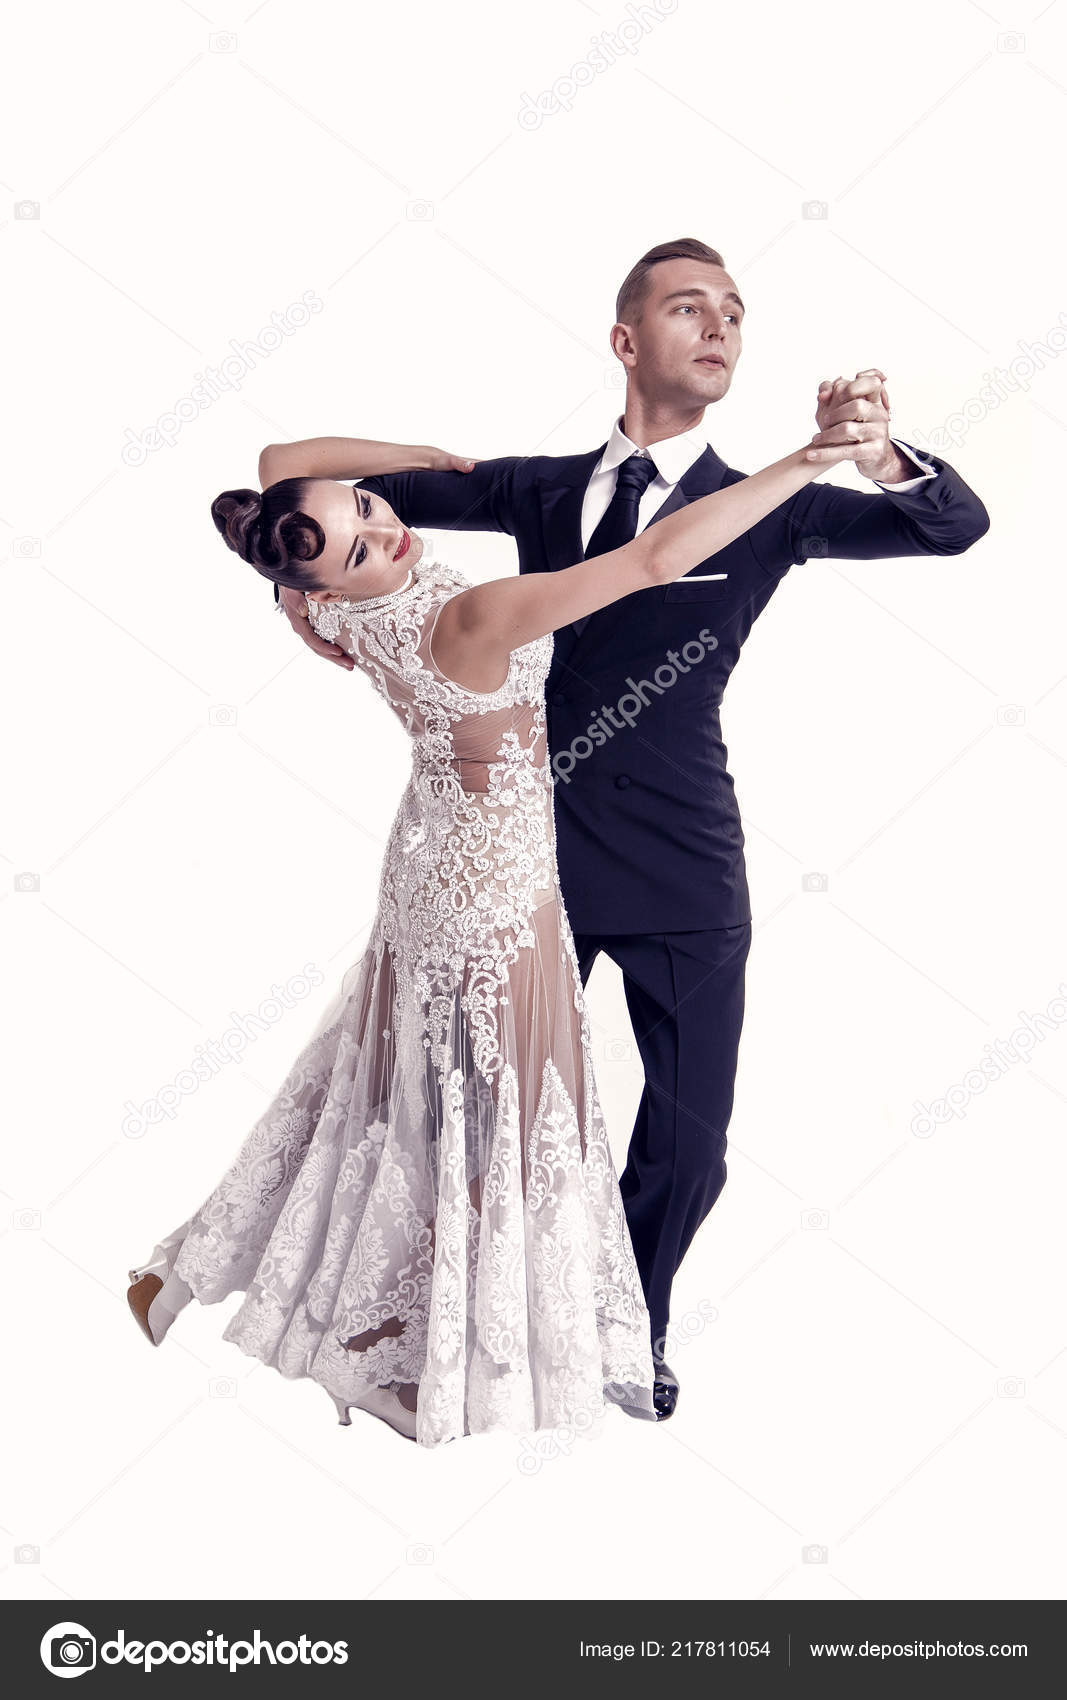 Dancer Pose Clipart Hd PNG, Dancers Couple A Man In Different Poses,  Colorful Design, Template, Cute PNG Image For Free Download